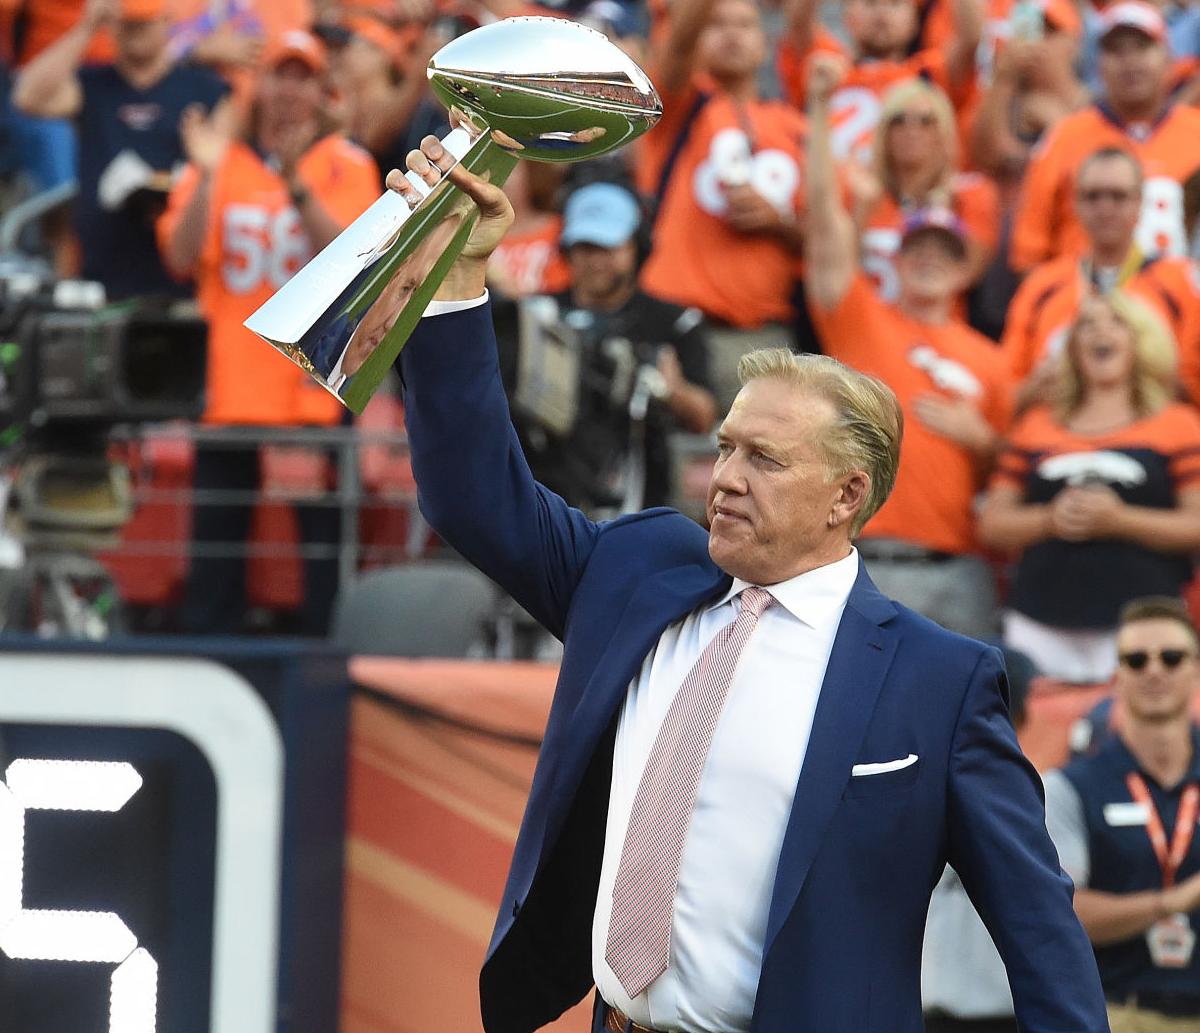 John Elway and the Denver Broncos, Key numbers through the years, Broncos